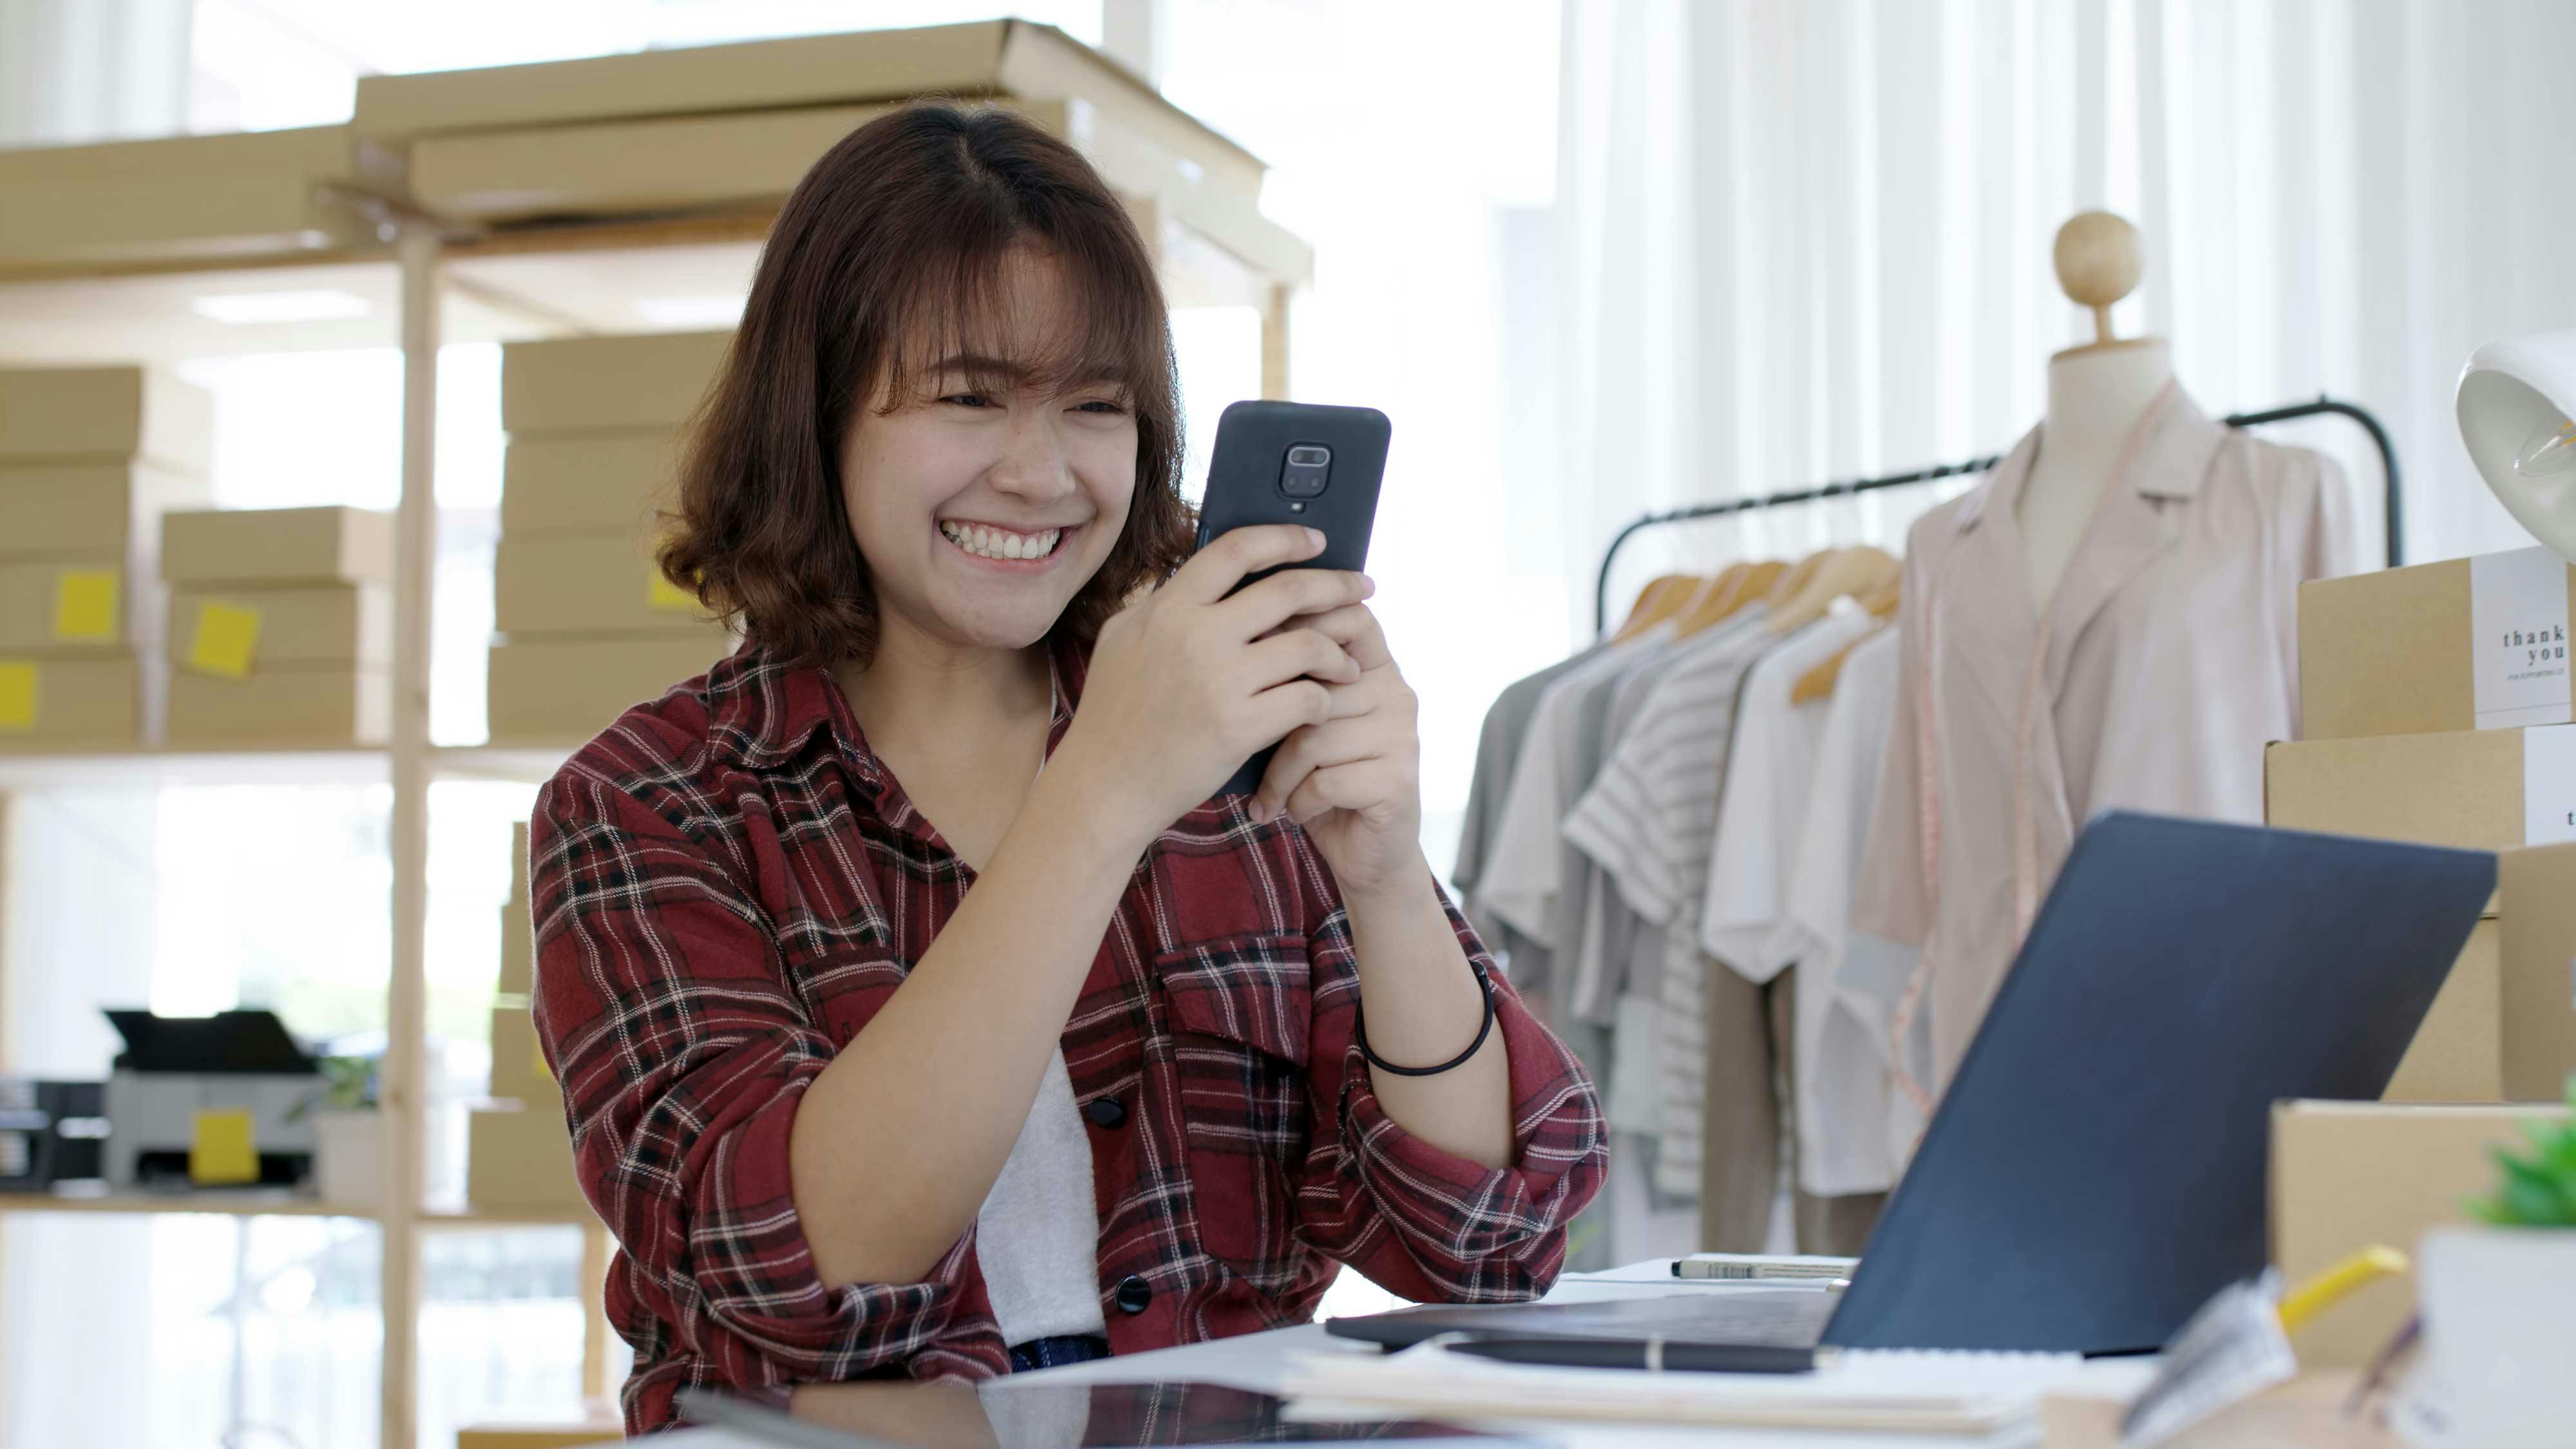  woman smiling at her phone in fashion studio for selling online